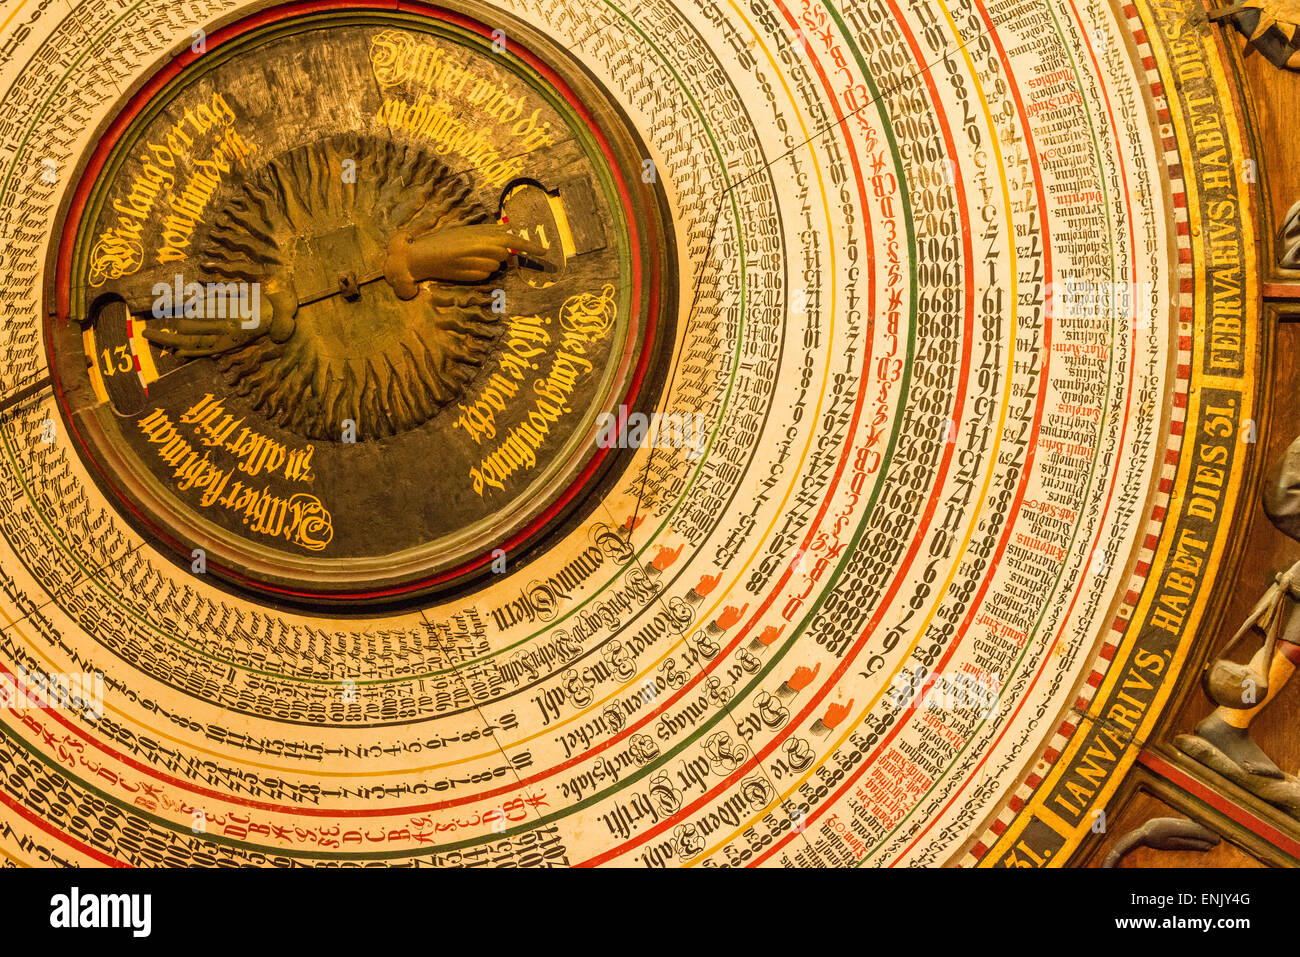 Calendar detail of 15th century astronomical clock (1472) in St. Mary's